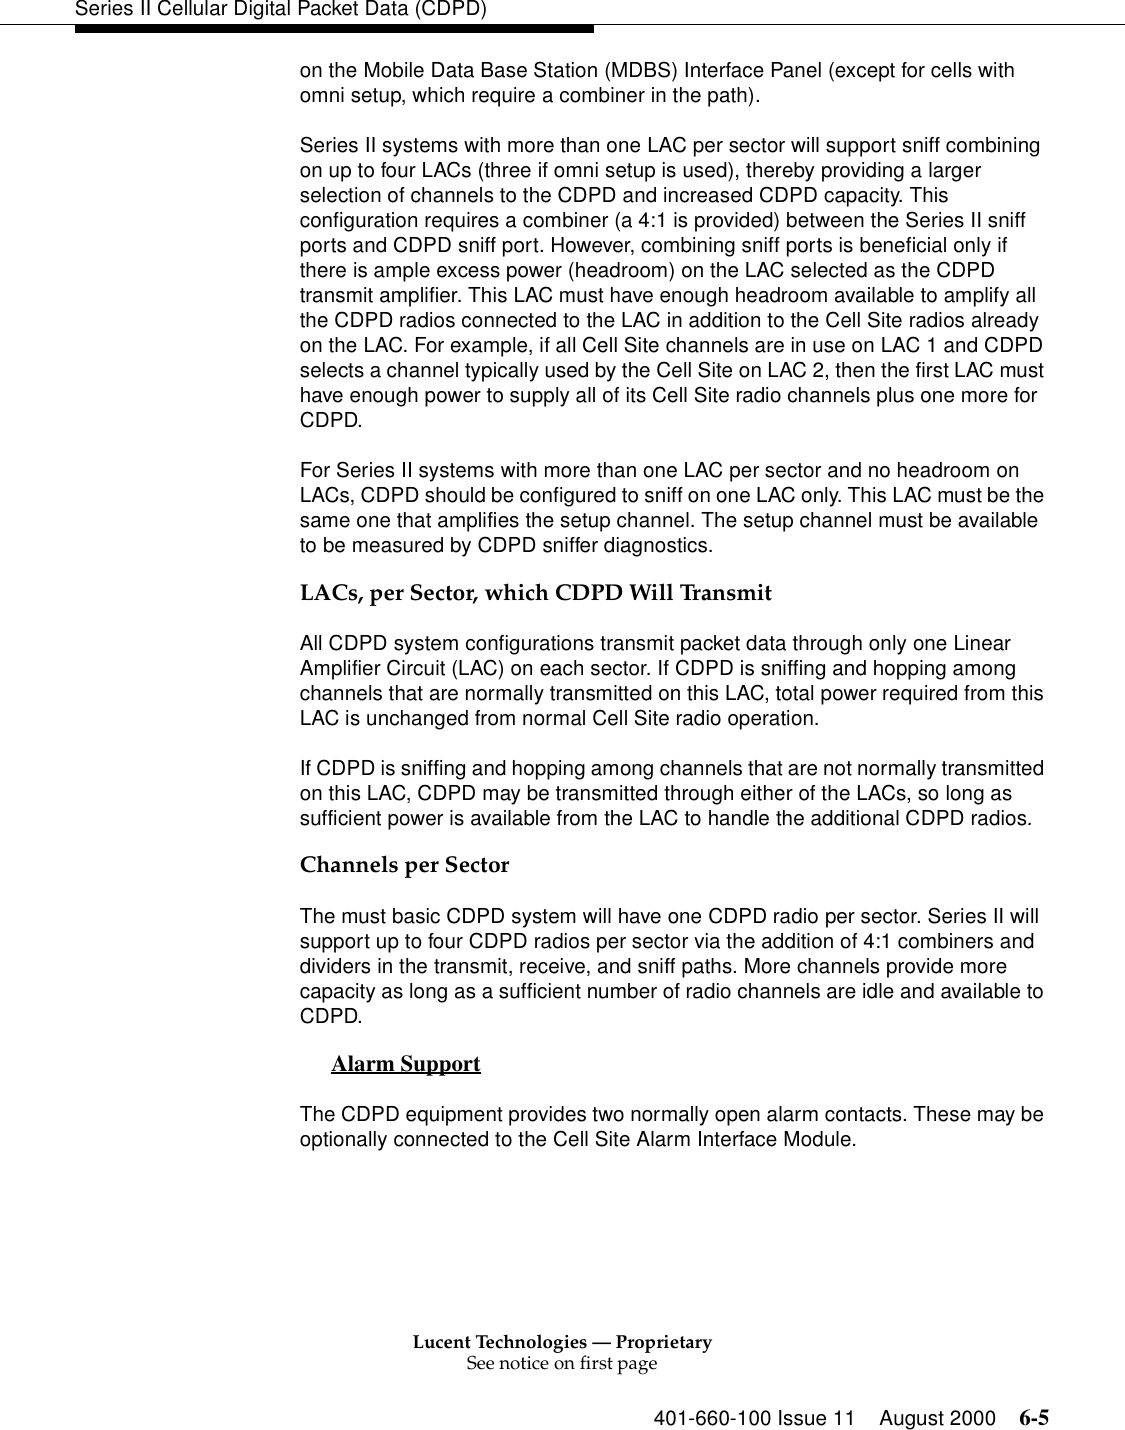 Lucent Technologies — ProprietarySee notice on first page401-660-100 Issue 11 August 2000 6-5Series II Cellular Digital Packet Data (CDPD)on the Mobile Data Base Station (MDBS) Interface Panel (except for cells with omni setup, which require a combiner in the path).Series II systems with more than one LAC per sector will support sniff combining on up to four LACs (three if omni setup is used), thereby providing a larger selection of channels to the CDPD and increased CDPD capacity. This configuration requires a combiner (a 4:1 is provided) between the Series II sniff ports and CDPD sniff port. However, combining sniff ports is beneficial only if there is ample excess power (headroom) on the LAC selected as the CDPD transmit amplifier. This LAC must have enough headroom available to amplify all the CDPD radios connected to the LAC in addition to the Cell Site radios already on the LAC. For example, if all Cell Site channels are in use on LAC 1 and CDPD selects a channel typically used by the Cell Site on LAC 2, then the first LAC must have enough power to supply all of its Cell Site radio channels plus one more for CDPD. For Series II systems with more than one LAC per sector and no headroom on LACs, CDPD should be configured to sniff on one LAC only. This LAC must be the same one that amplifies the setup channel. The setup channel must be available to be measured by CDPD sniffer diagnostics. LACs, per Sector, which CDPD Will TransmitAll CDPD system configurations transmit packet data through only one Linear Amplifier Circuit (LAC) on each sector. If CDPD is sniffing and hopping among channels that are normally transmitted on this LAC, total power required from this LAC is unchanged from normal Cell Site radio operation. If CDPD is sniffing and hopping among channels that are not normally transmitted on this LAC, CDPD may be transmitted through either of the LACs, so long as sufficient power is available from the LAC to handle the additional CDPD radios. Channels per SectorThe must basic CDPD system will have one CDPD radio per sector. Series II will support up to four CDPD radios per sector via the addition of 4:1 combiners and dividers in the transmit, receive, and sniff paths. More channels provide more capacity as long as a sufficient number of radio channels are idle and available to CDPD. Alarm Support 0The CDPD equipment provides two normally open alarm contacts. These may be optionally connected to the Cell Site Alarm Interface Module. 